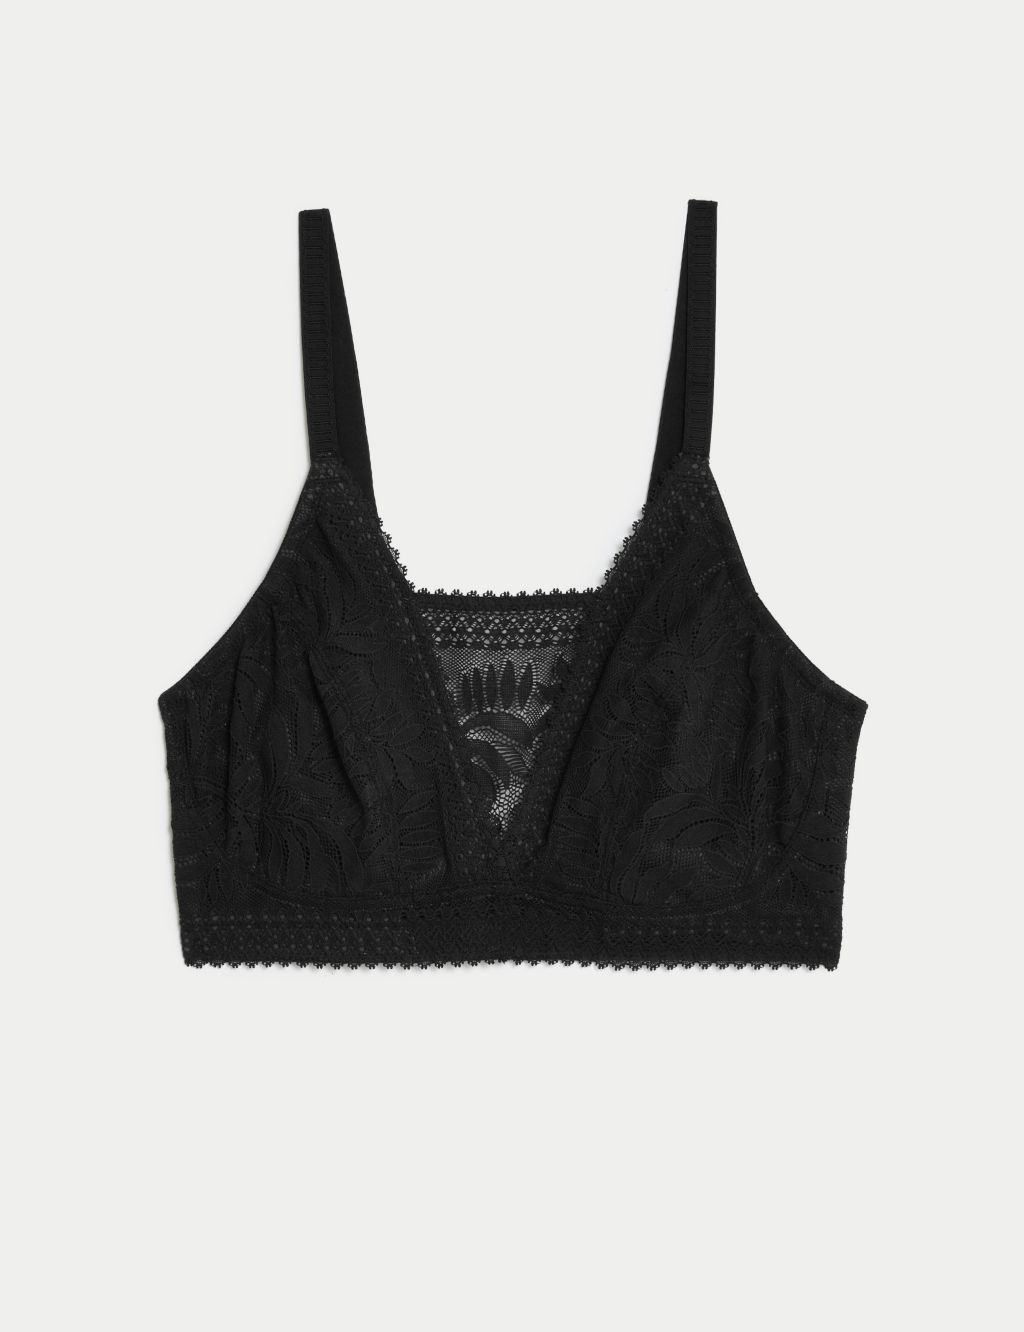 Flexifit™ Lace Non Wired Post Surgery Bra image 2